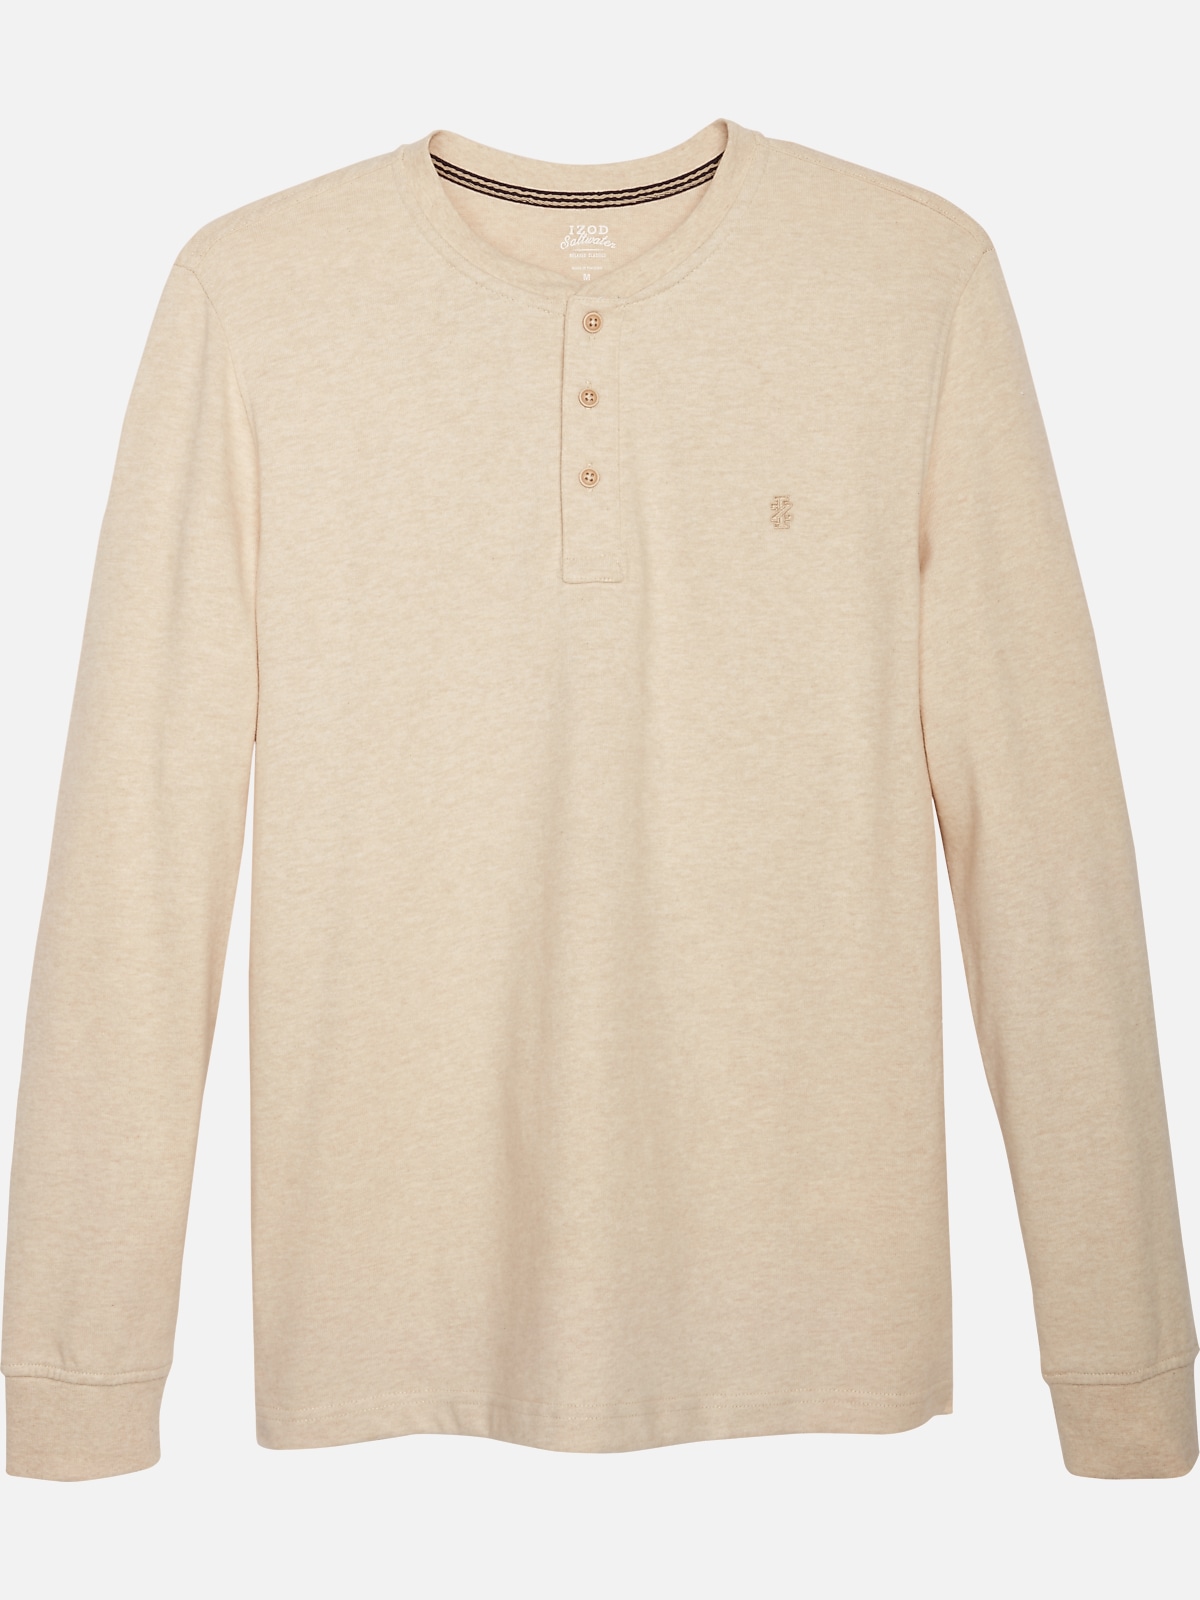 Izod Classic Fit Saltwater Henley | All Clearance $39.99| Men's Wearhouse